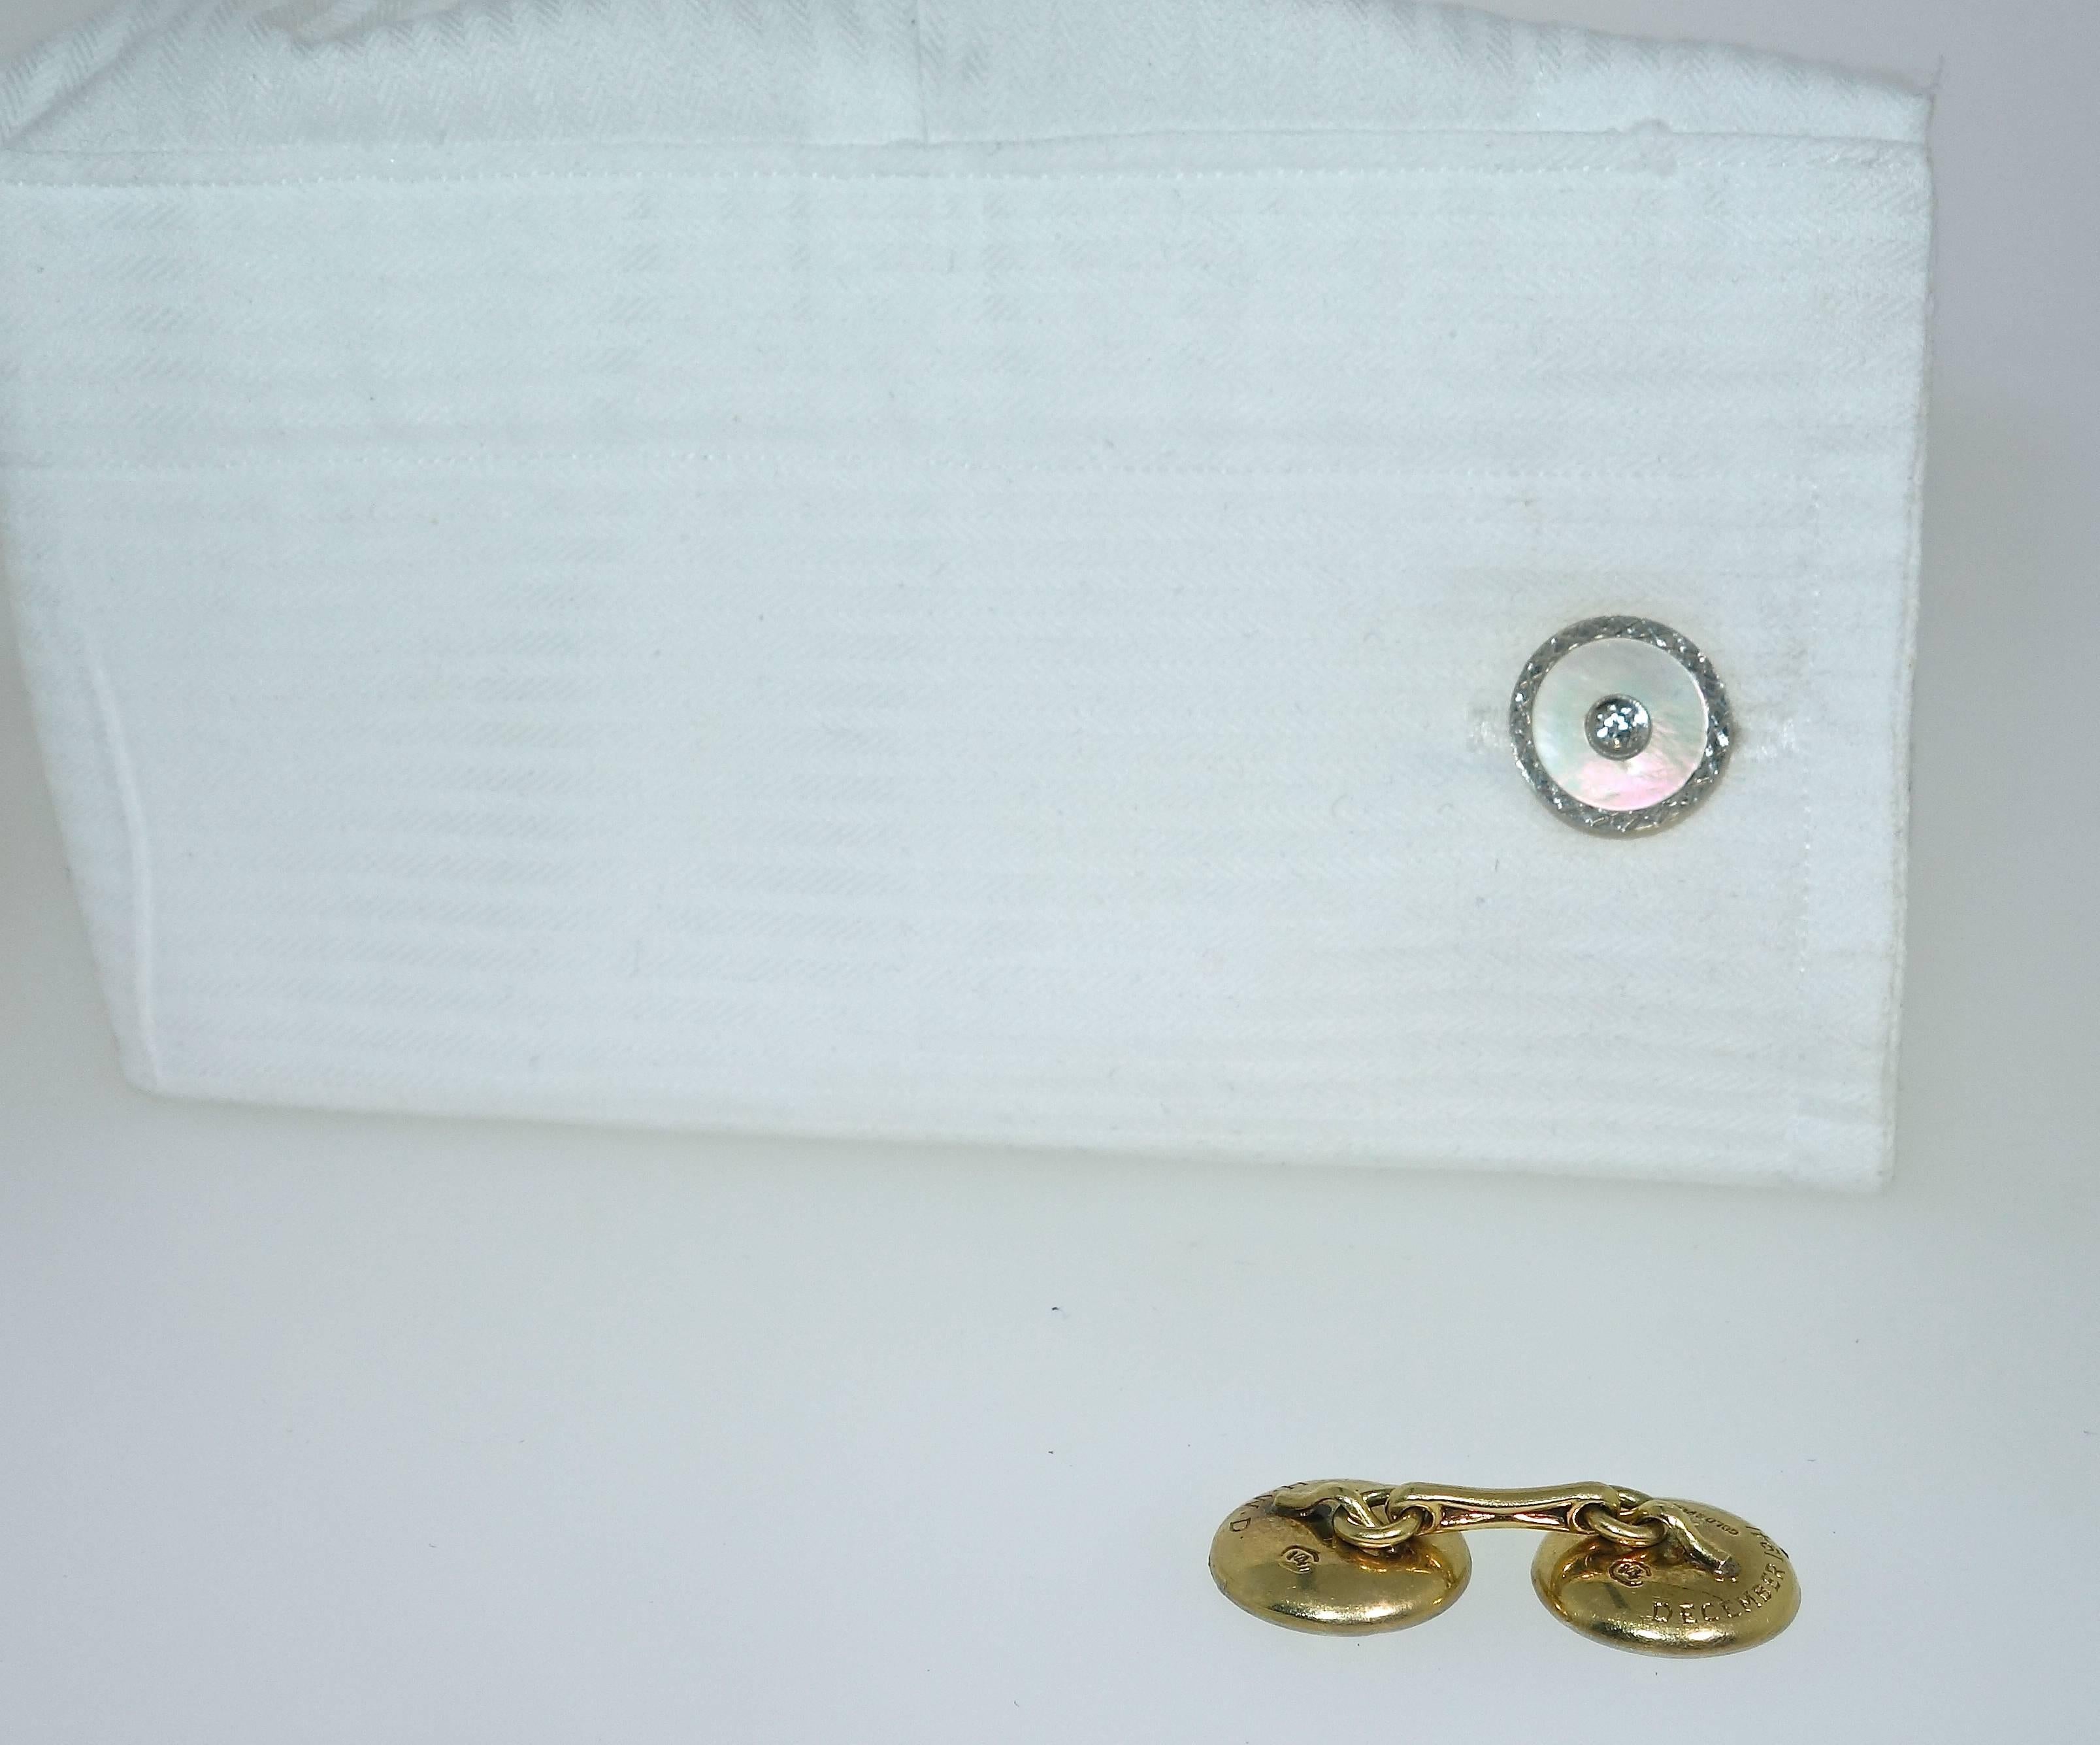 Old European Cut Diamond Cufflinks with Mother-of-Pearl in Platinum, circa 1925